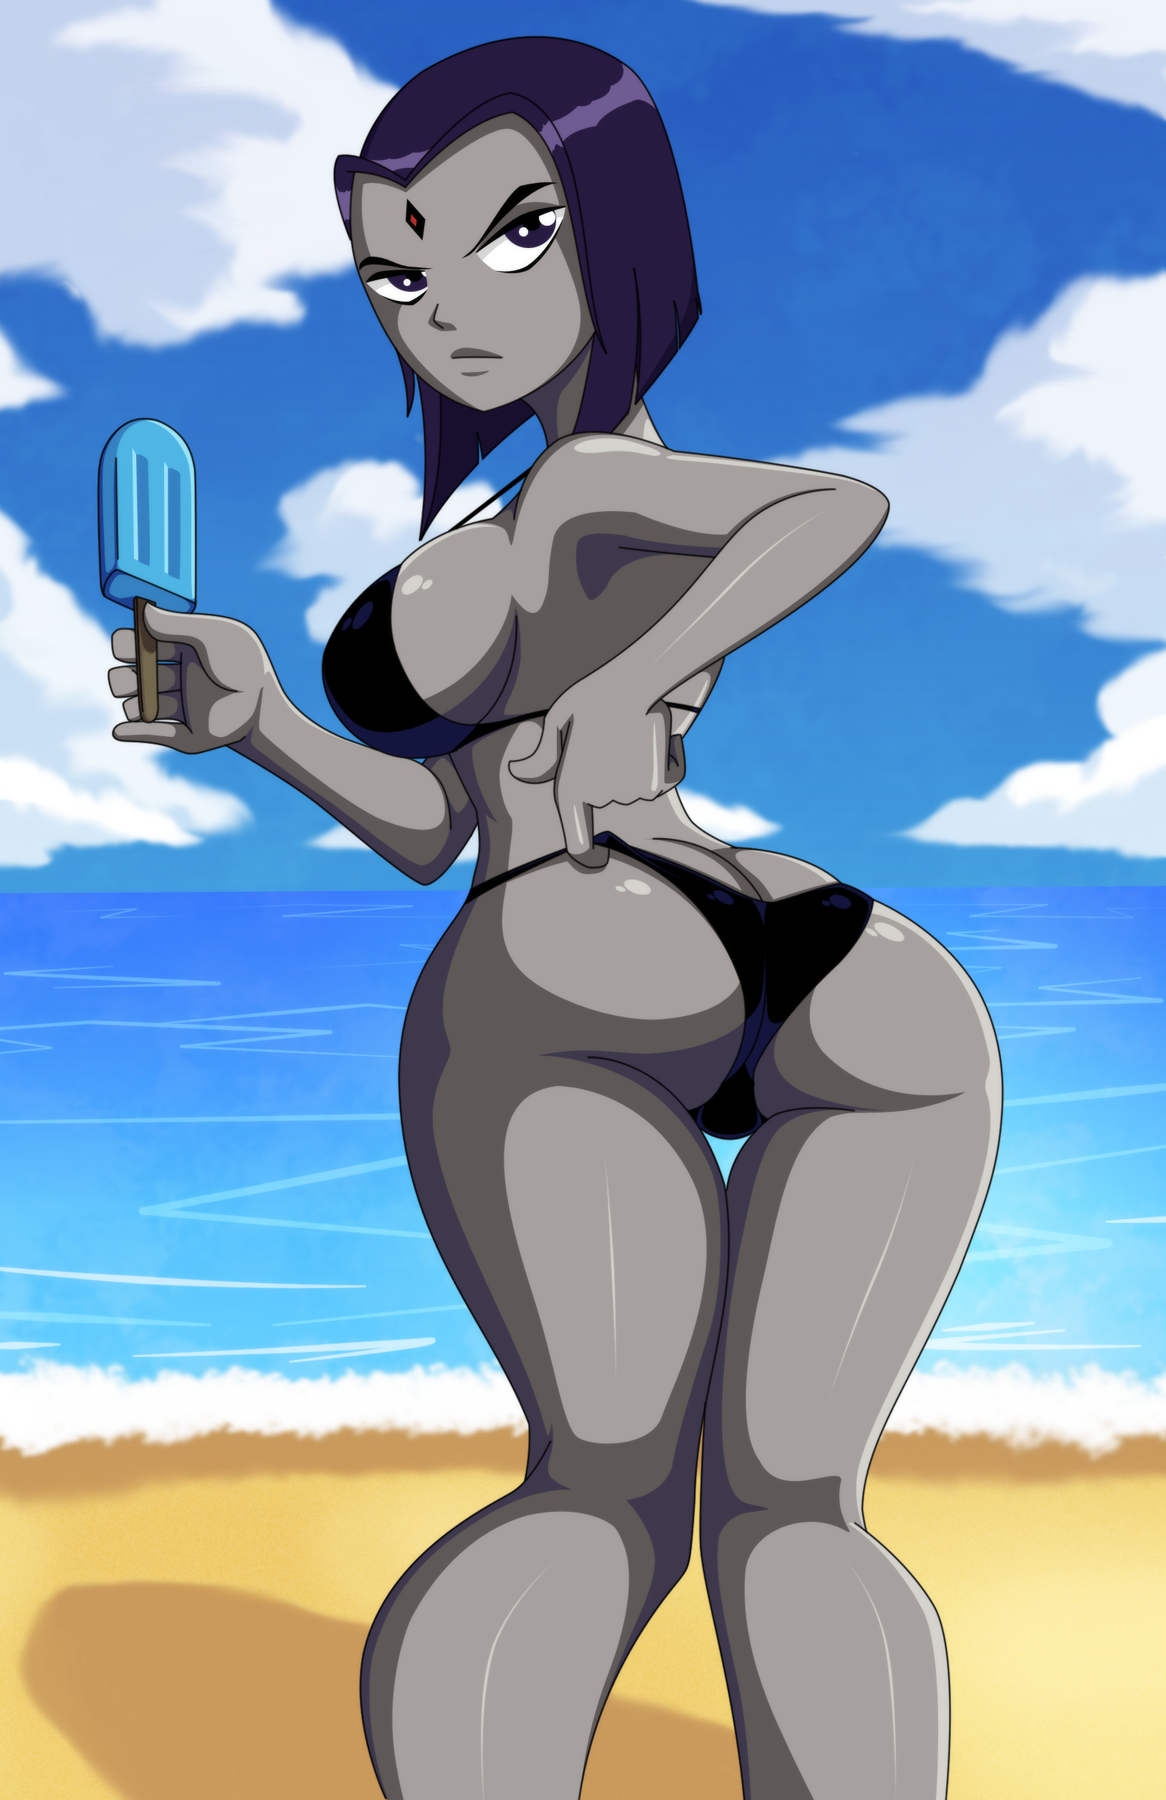 Raven at the beach.